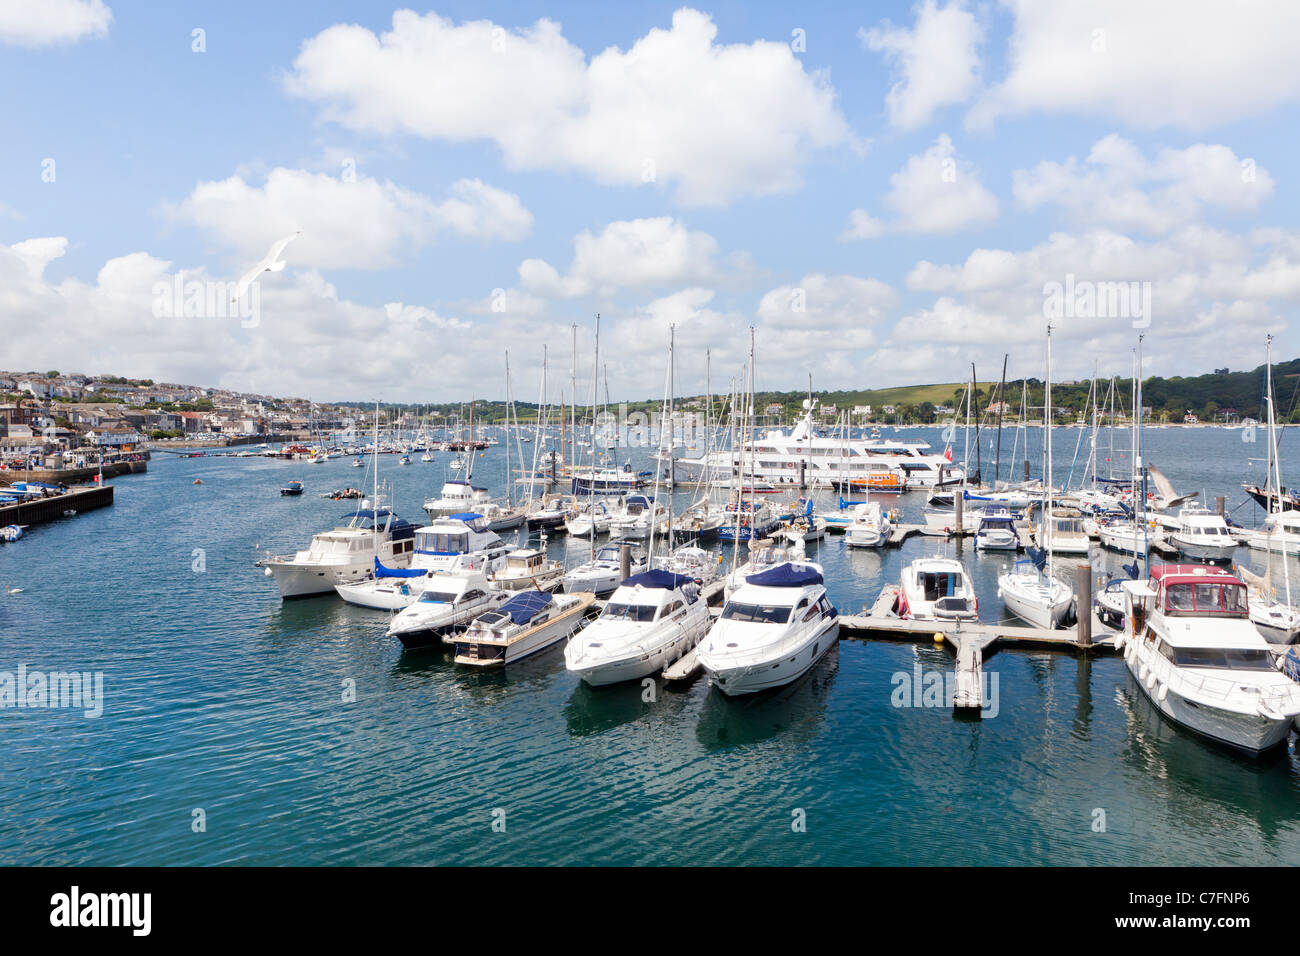 Yacts and pleasure boats moored in the River Fal at Falmouth, Cornwall Stock Photo